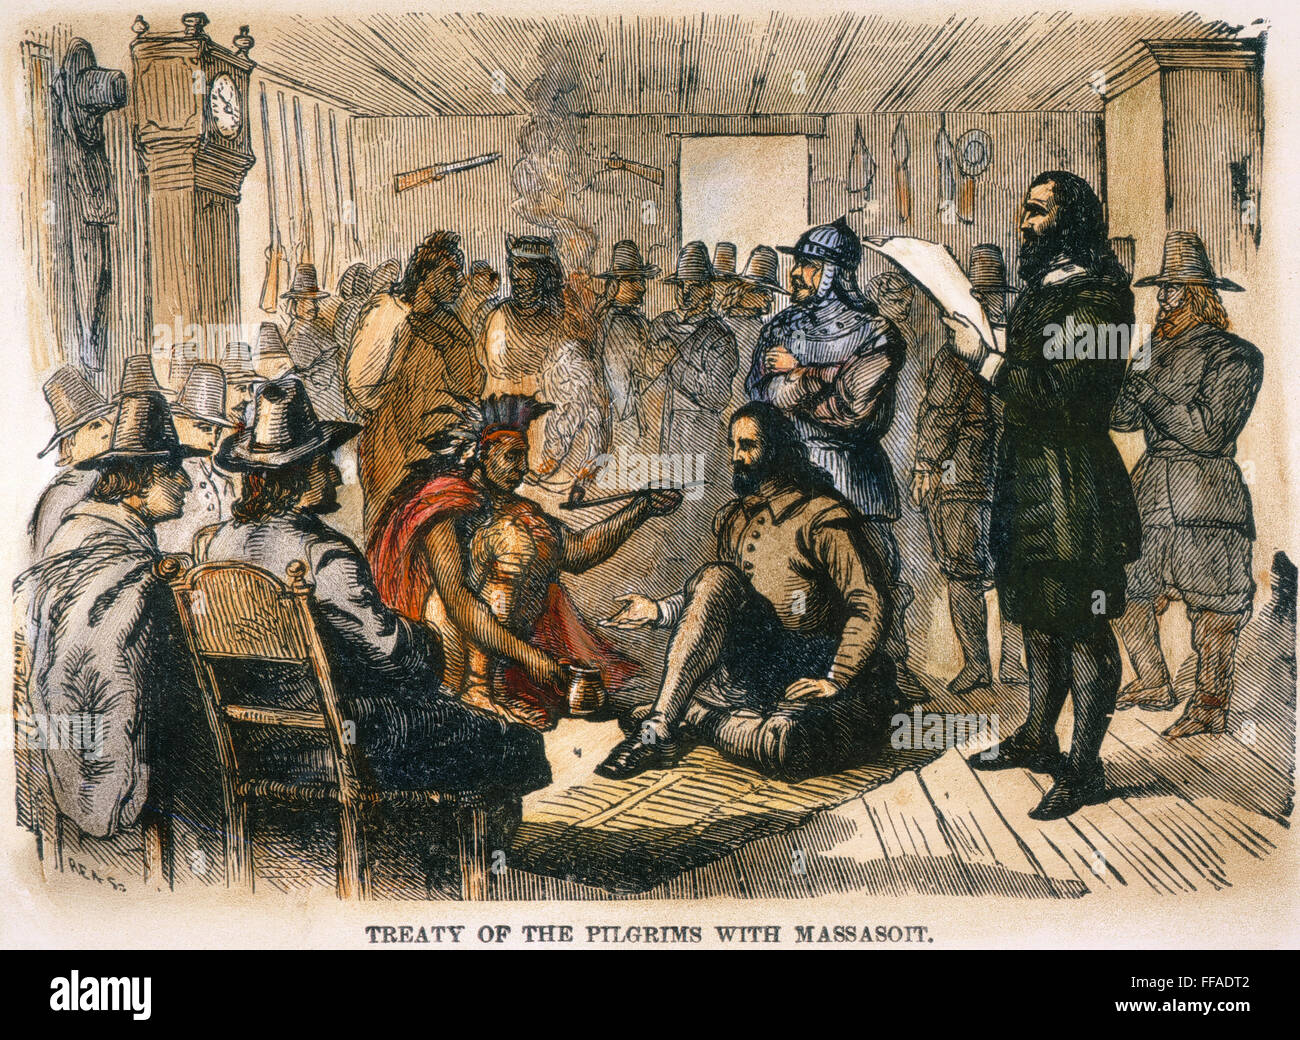 PILGRIMS' TREATY. /nThe Pilgrims' treaty with Chief Massasoit in William Bradford's house at Plymouth Colony, March 1621. Wood engraving, American, late 19th century. Stock Photo